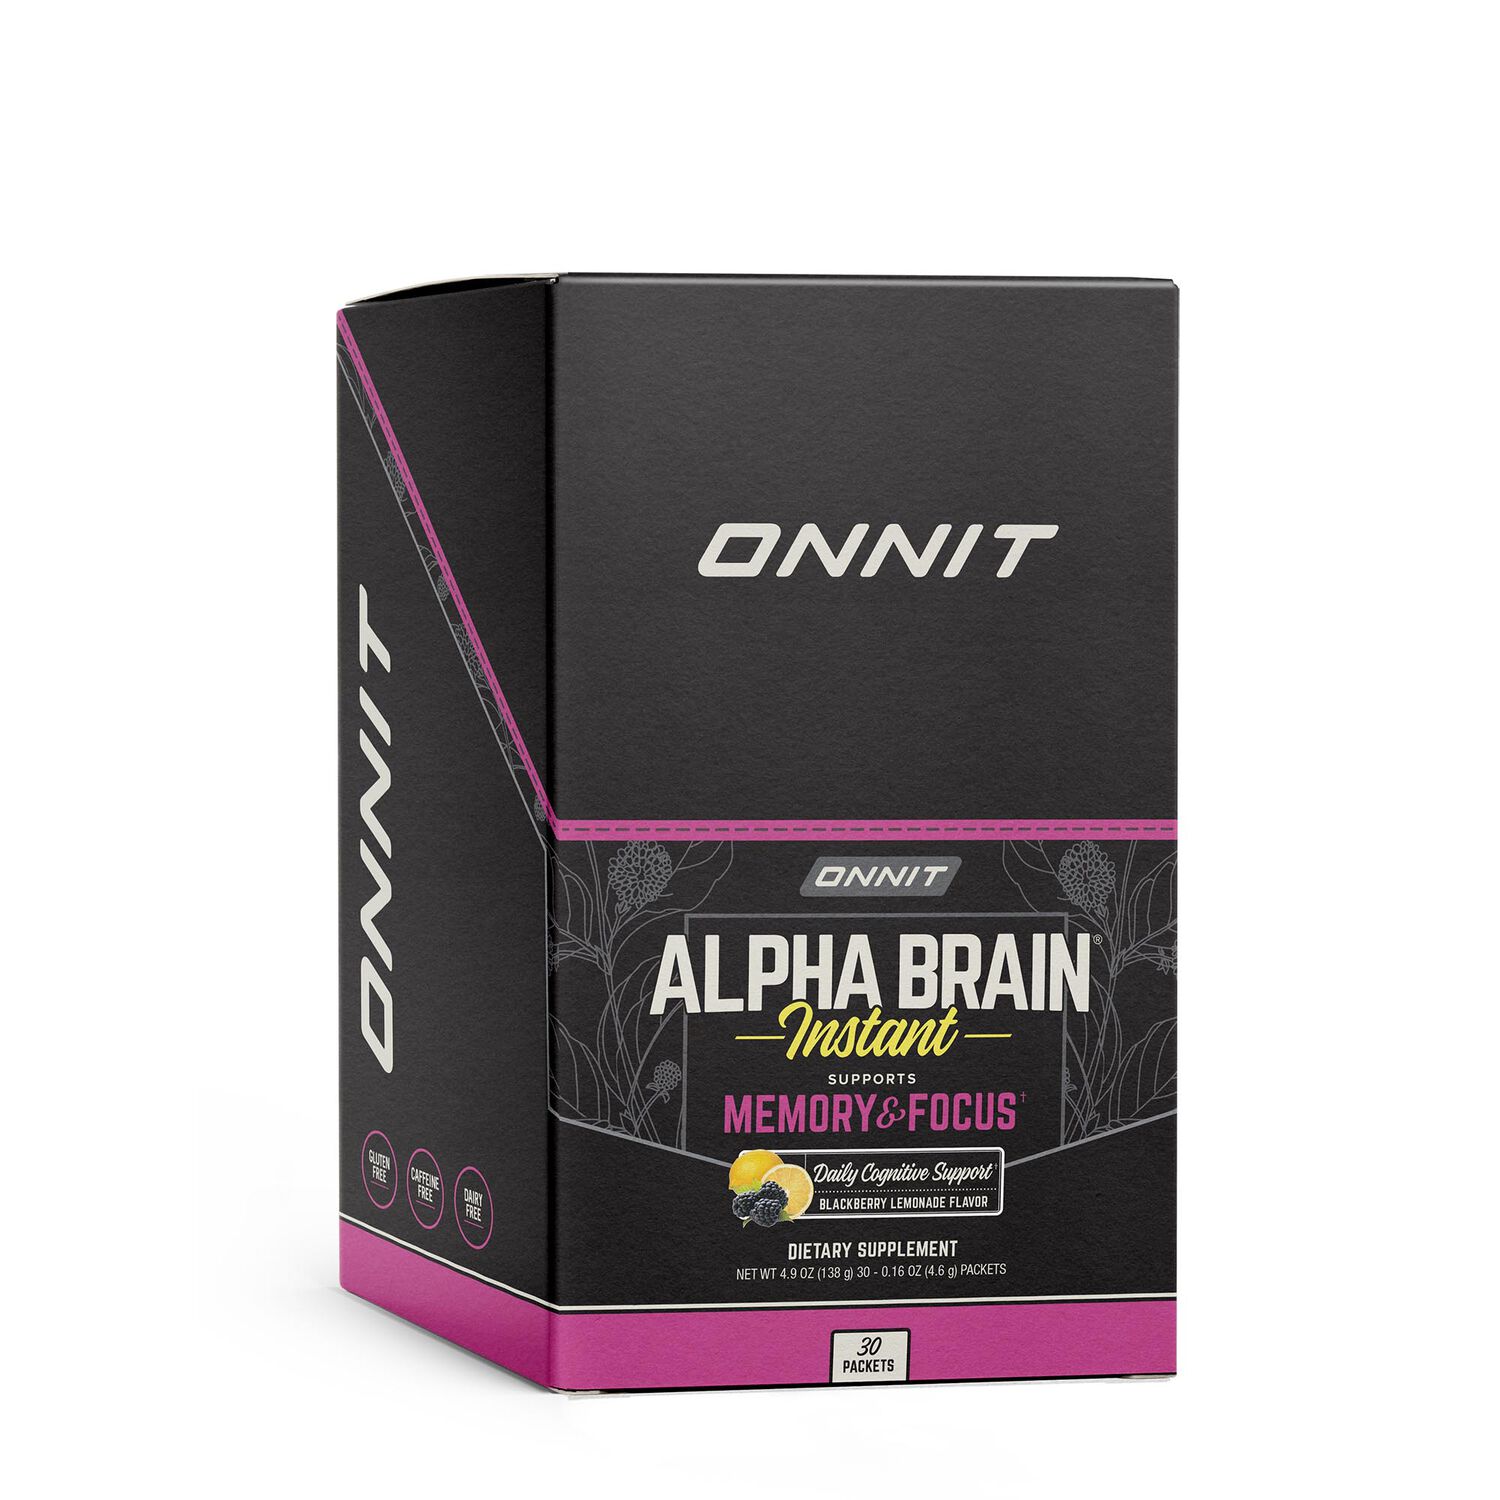 Onnit on X: Get Alpha BRAIN® and Alpha BRAIN® Instant today at